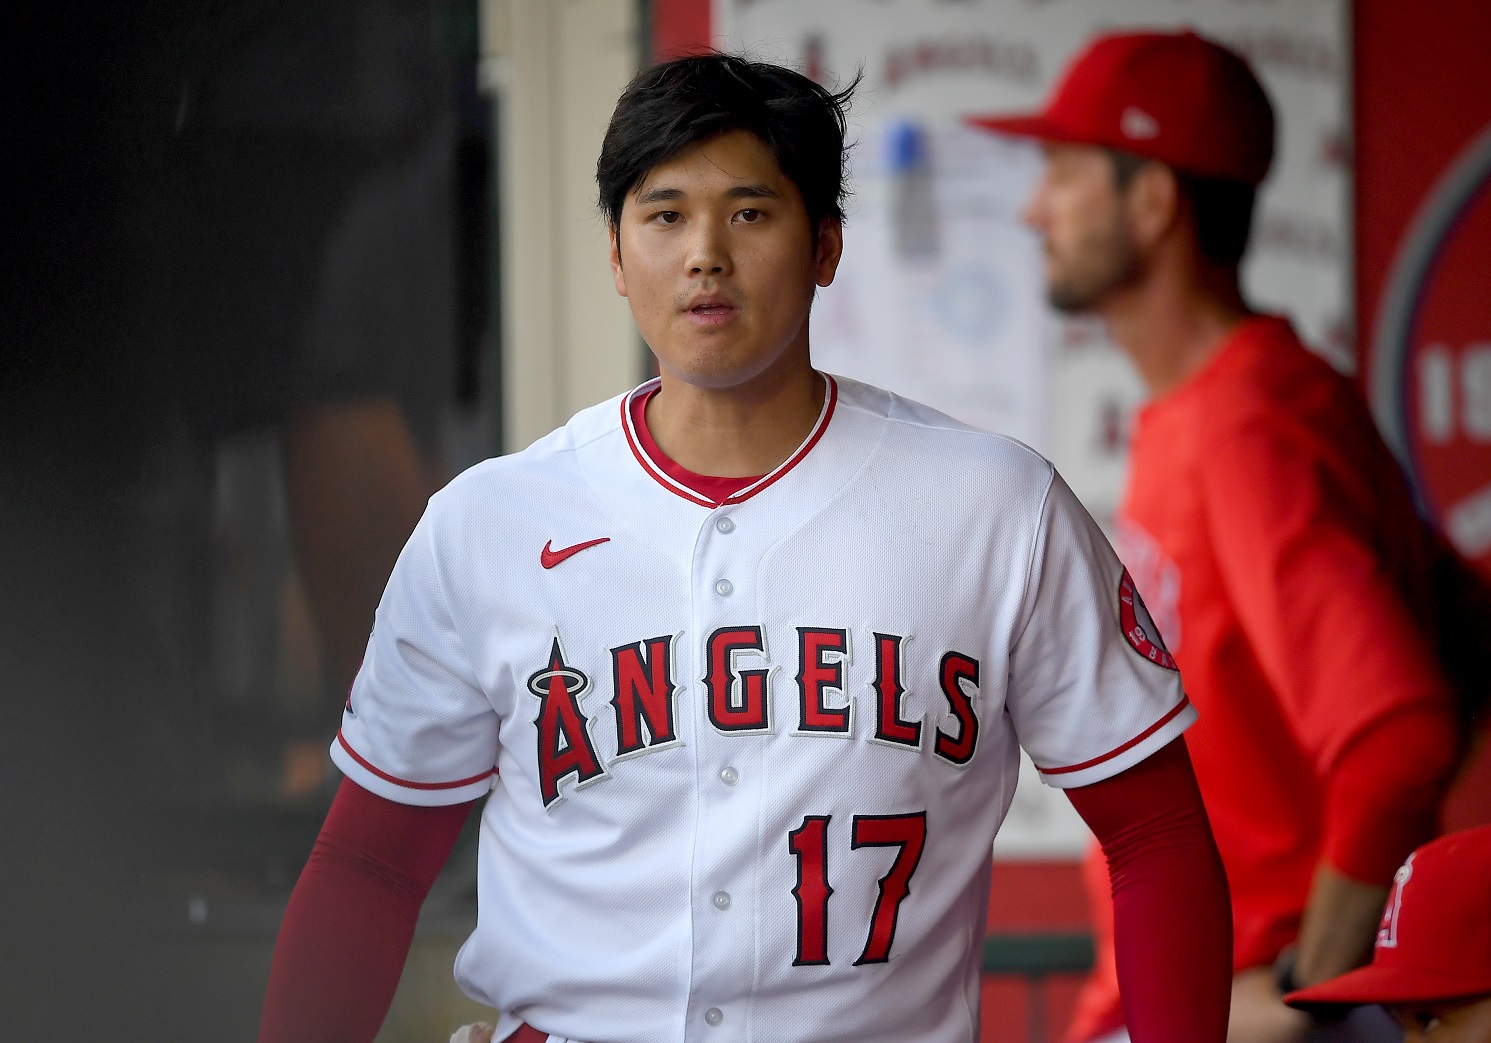 Shohei Ohtani of the Los Angeles Angels in the dugout during the game against the Seattle Mariners at Angel Stadium of Anaheim on July 16, 2021. | Jayne Kamin-Oncea/Getty Images